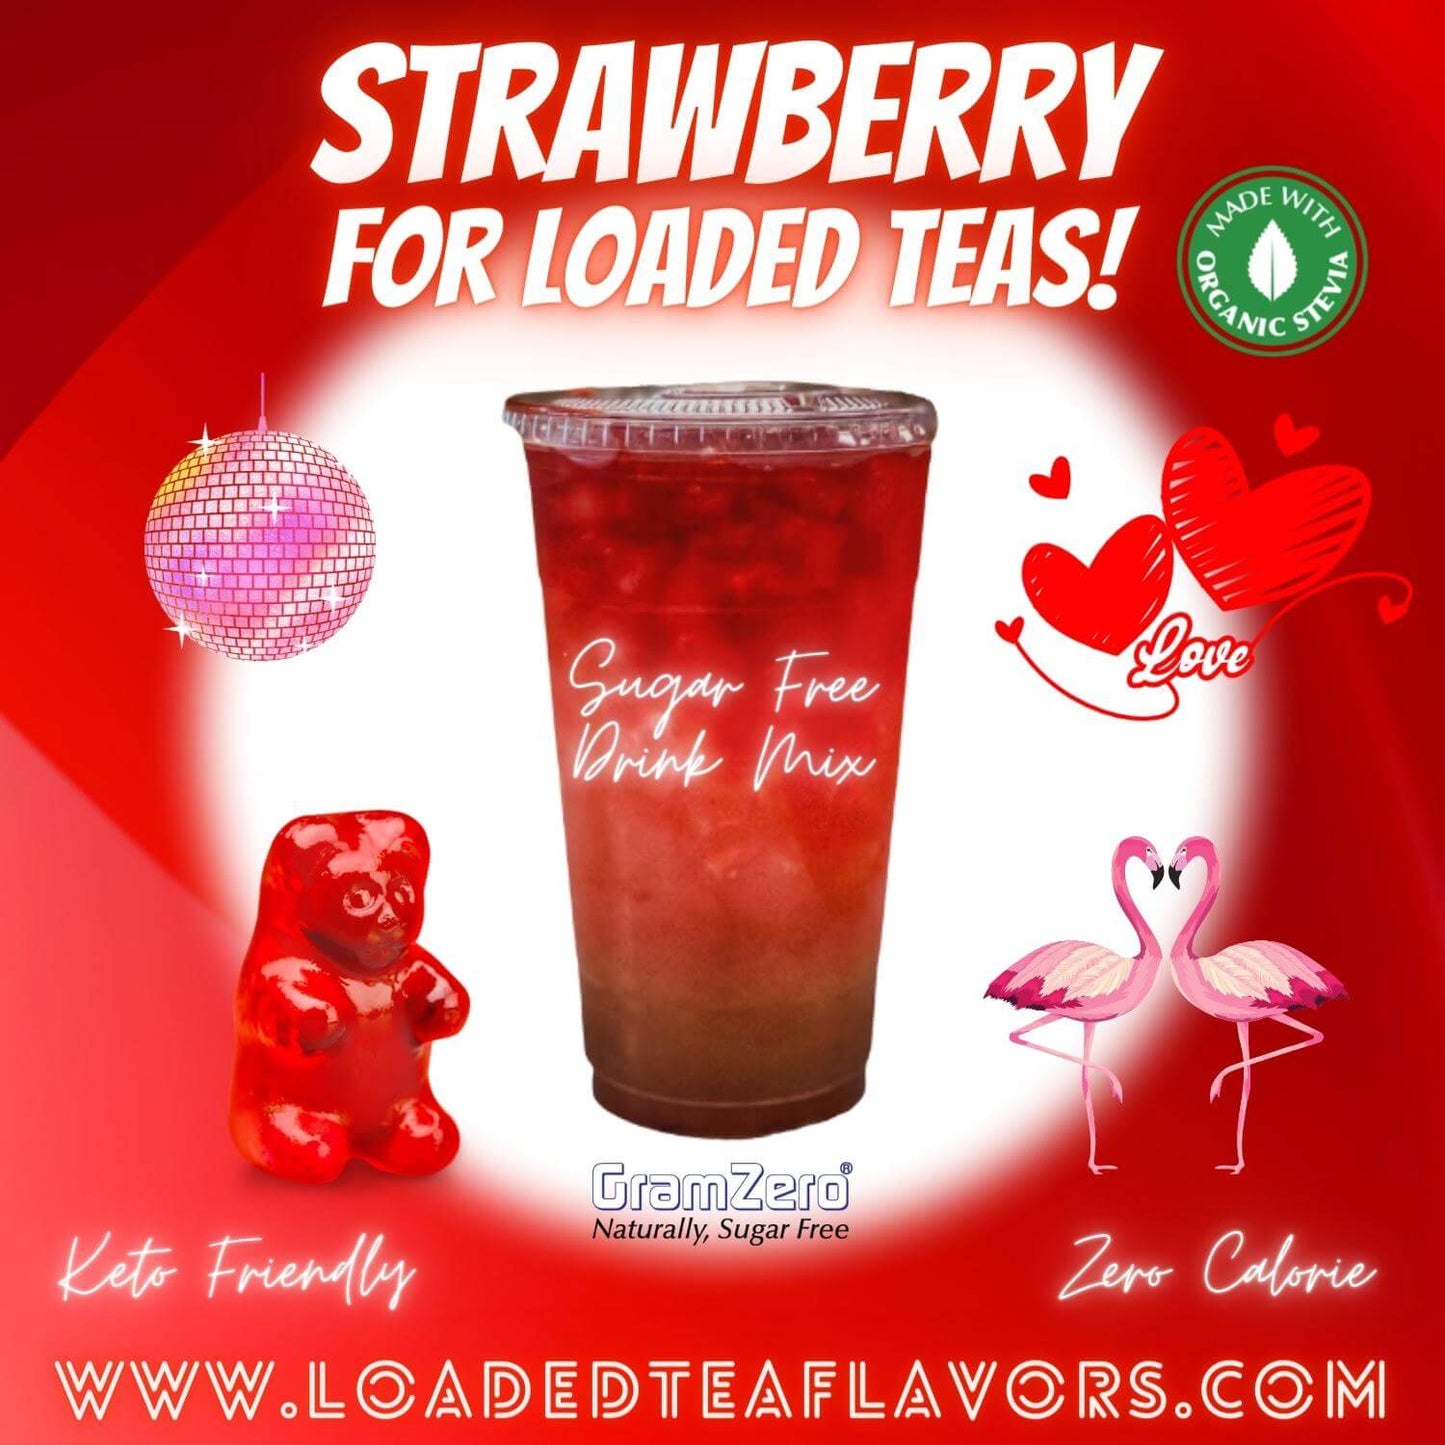 STRAWBERRY Sugar Free Drink Mix 🍓 Loaded Tea Flavoring